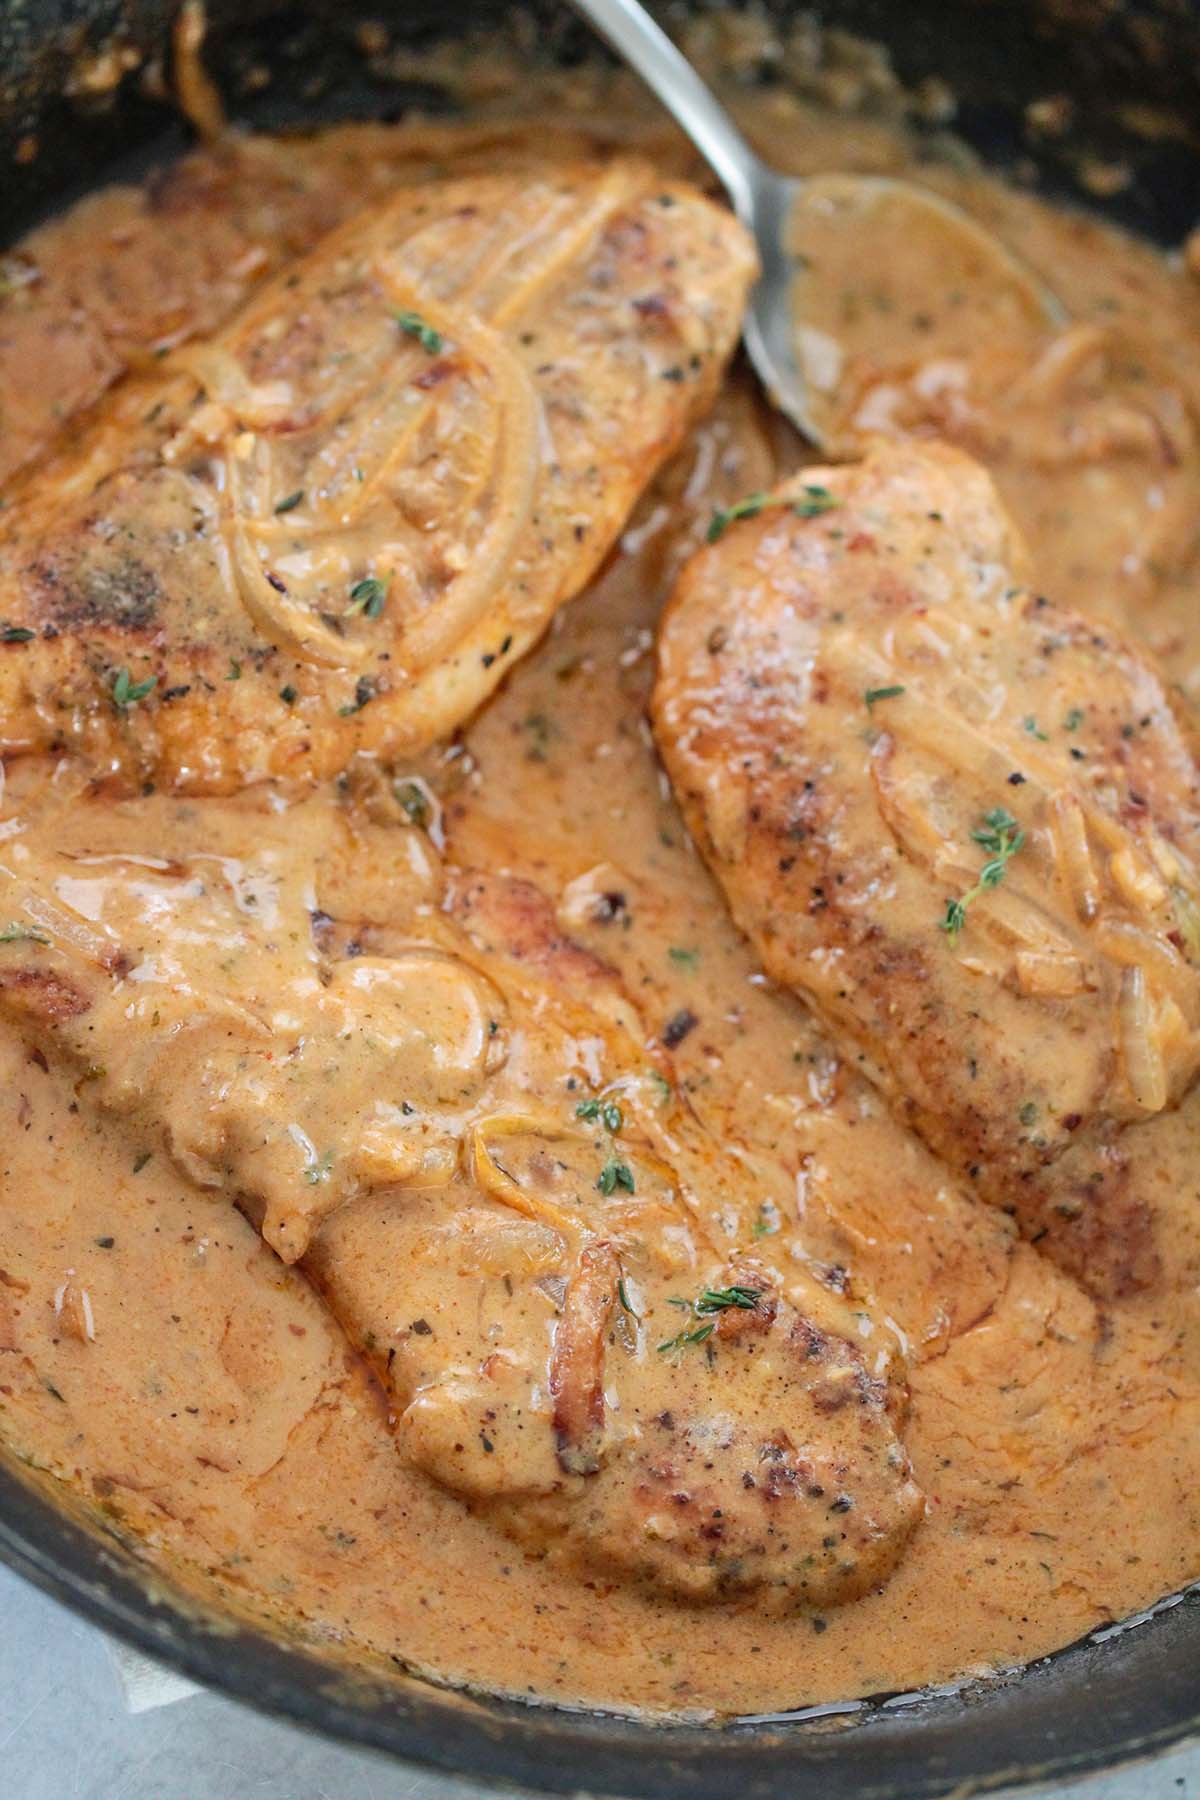 Smothered Chicken: How to Make It from Scratch